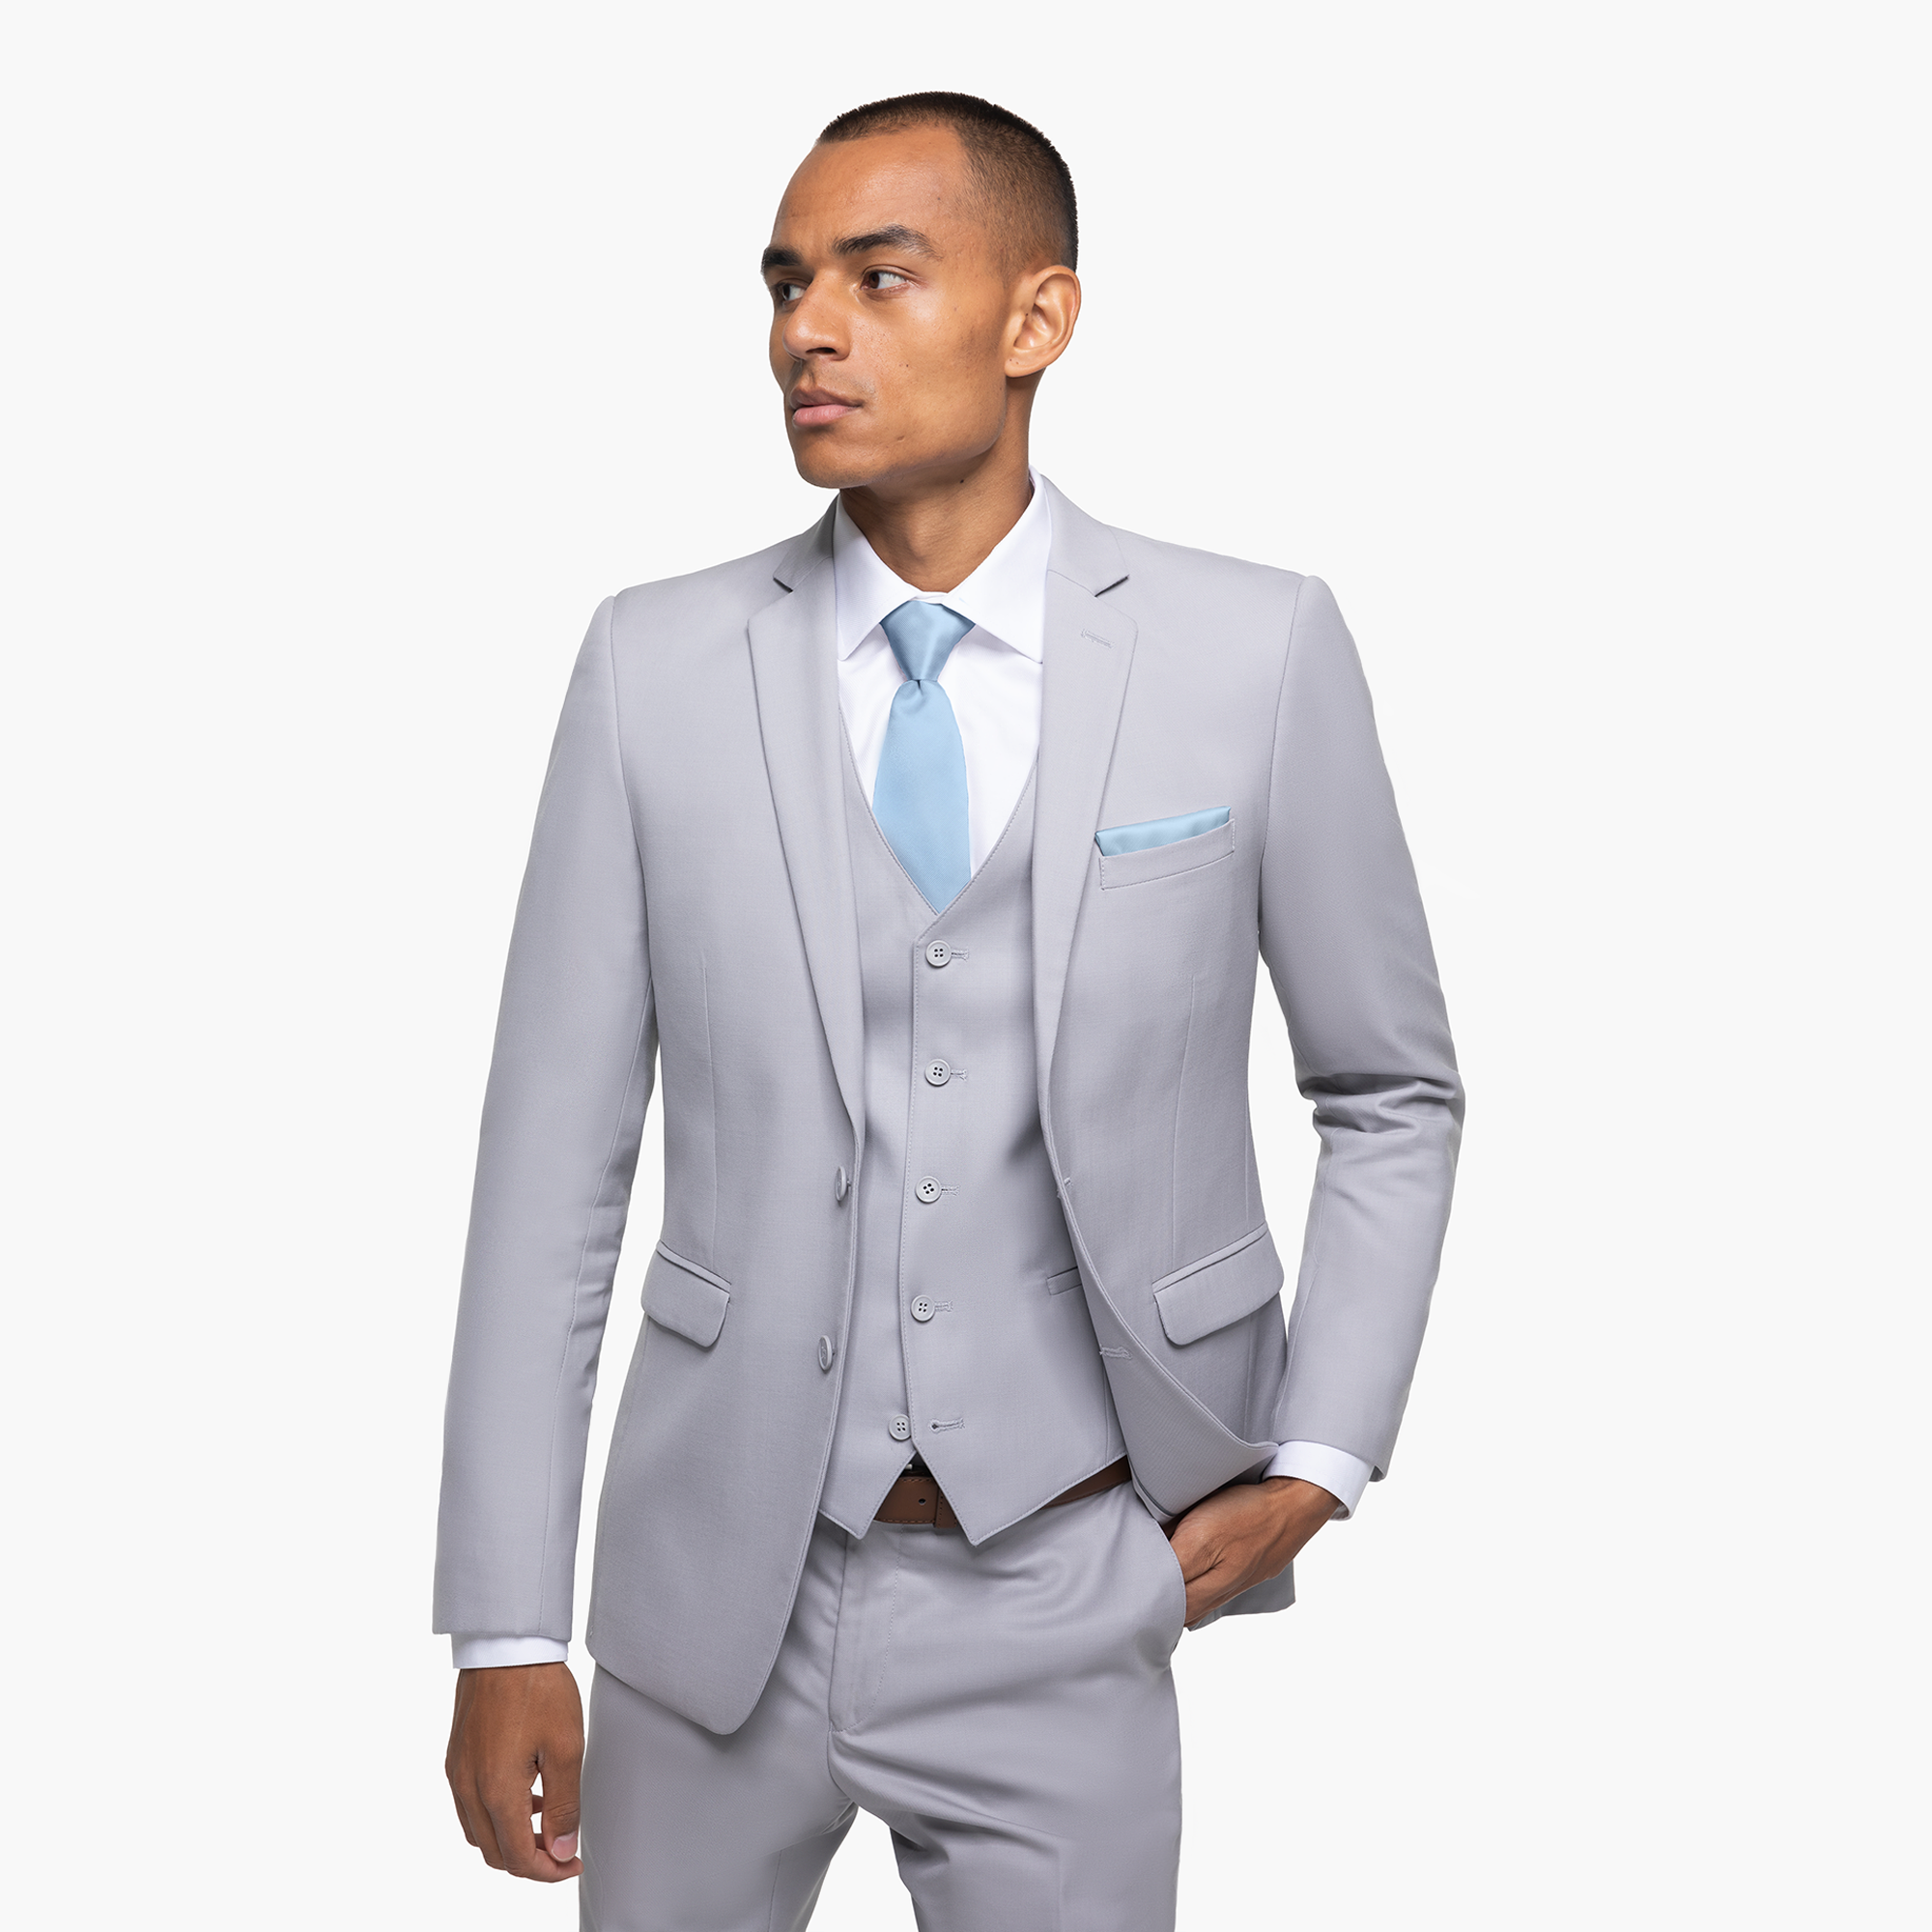 Earth-toned Cement Gray Suit on male model